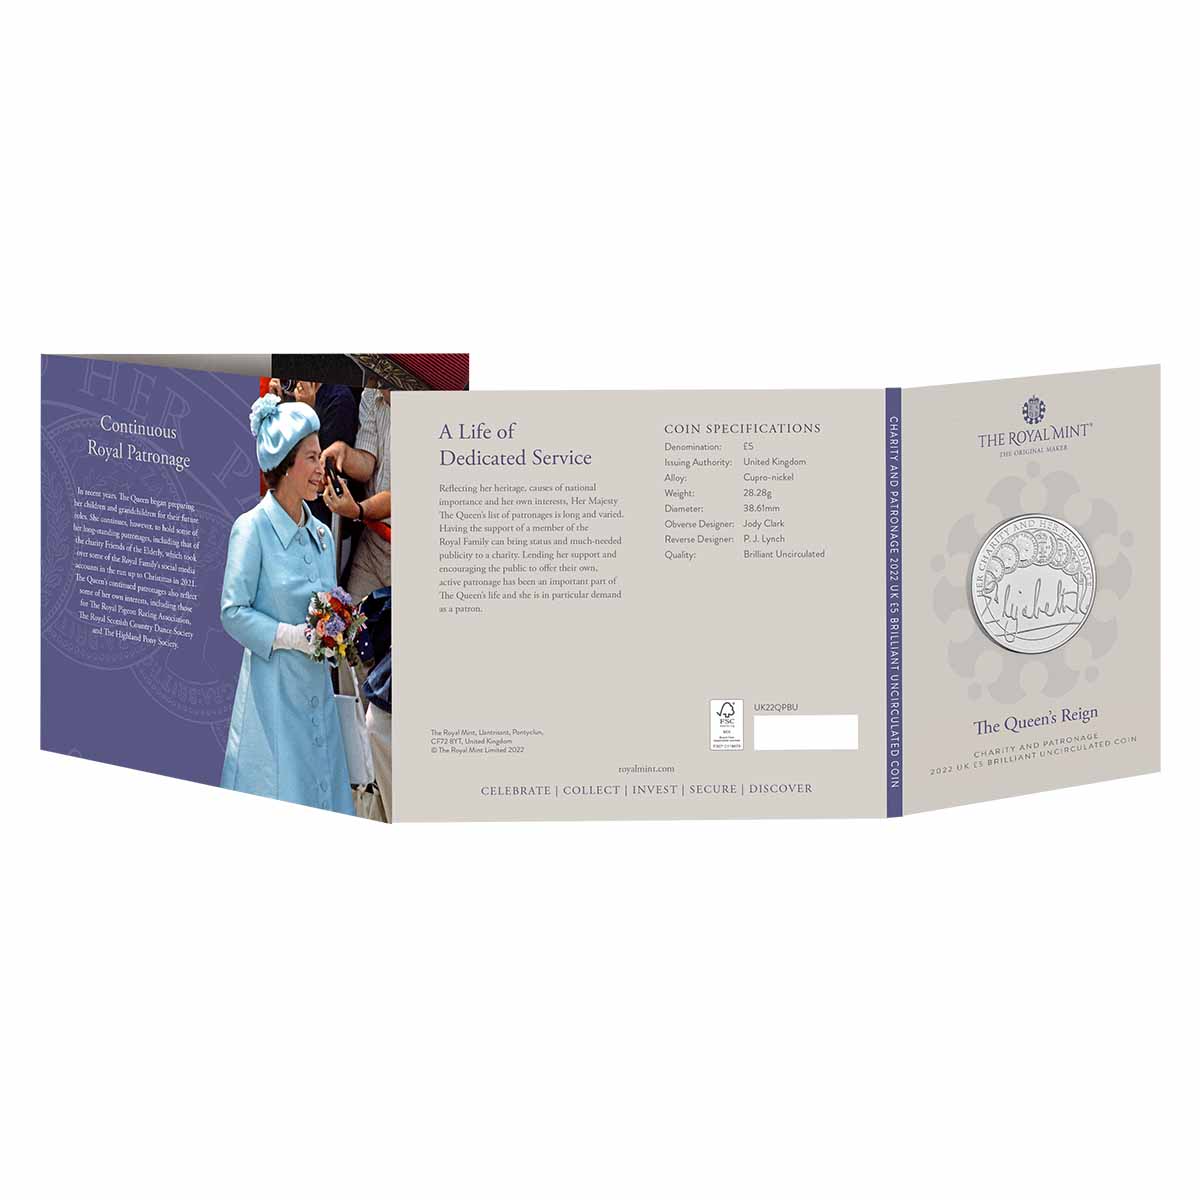 The Queen's Reign Charity and Patronage 2022 £5 Brilliant Uncirculated Coin